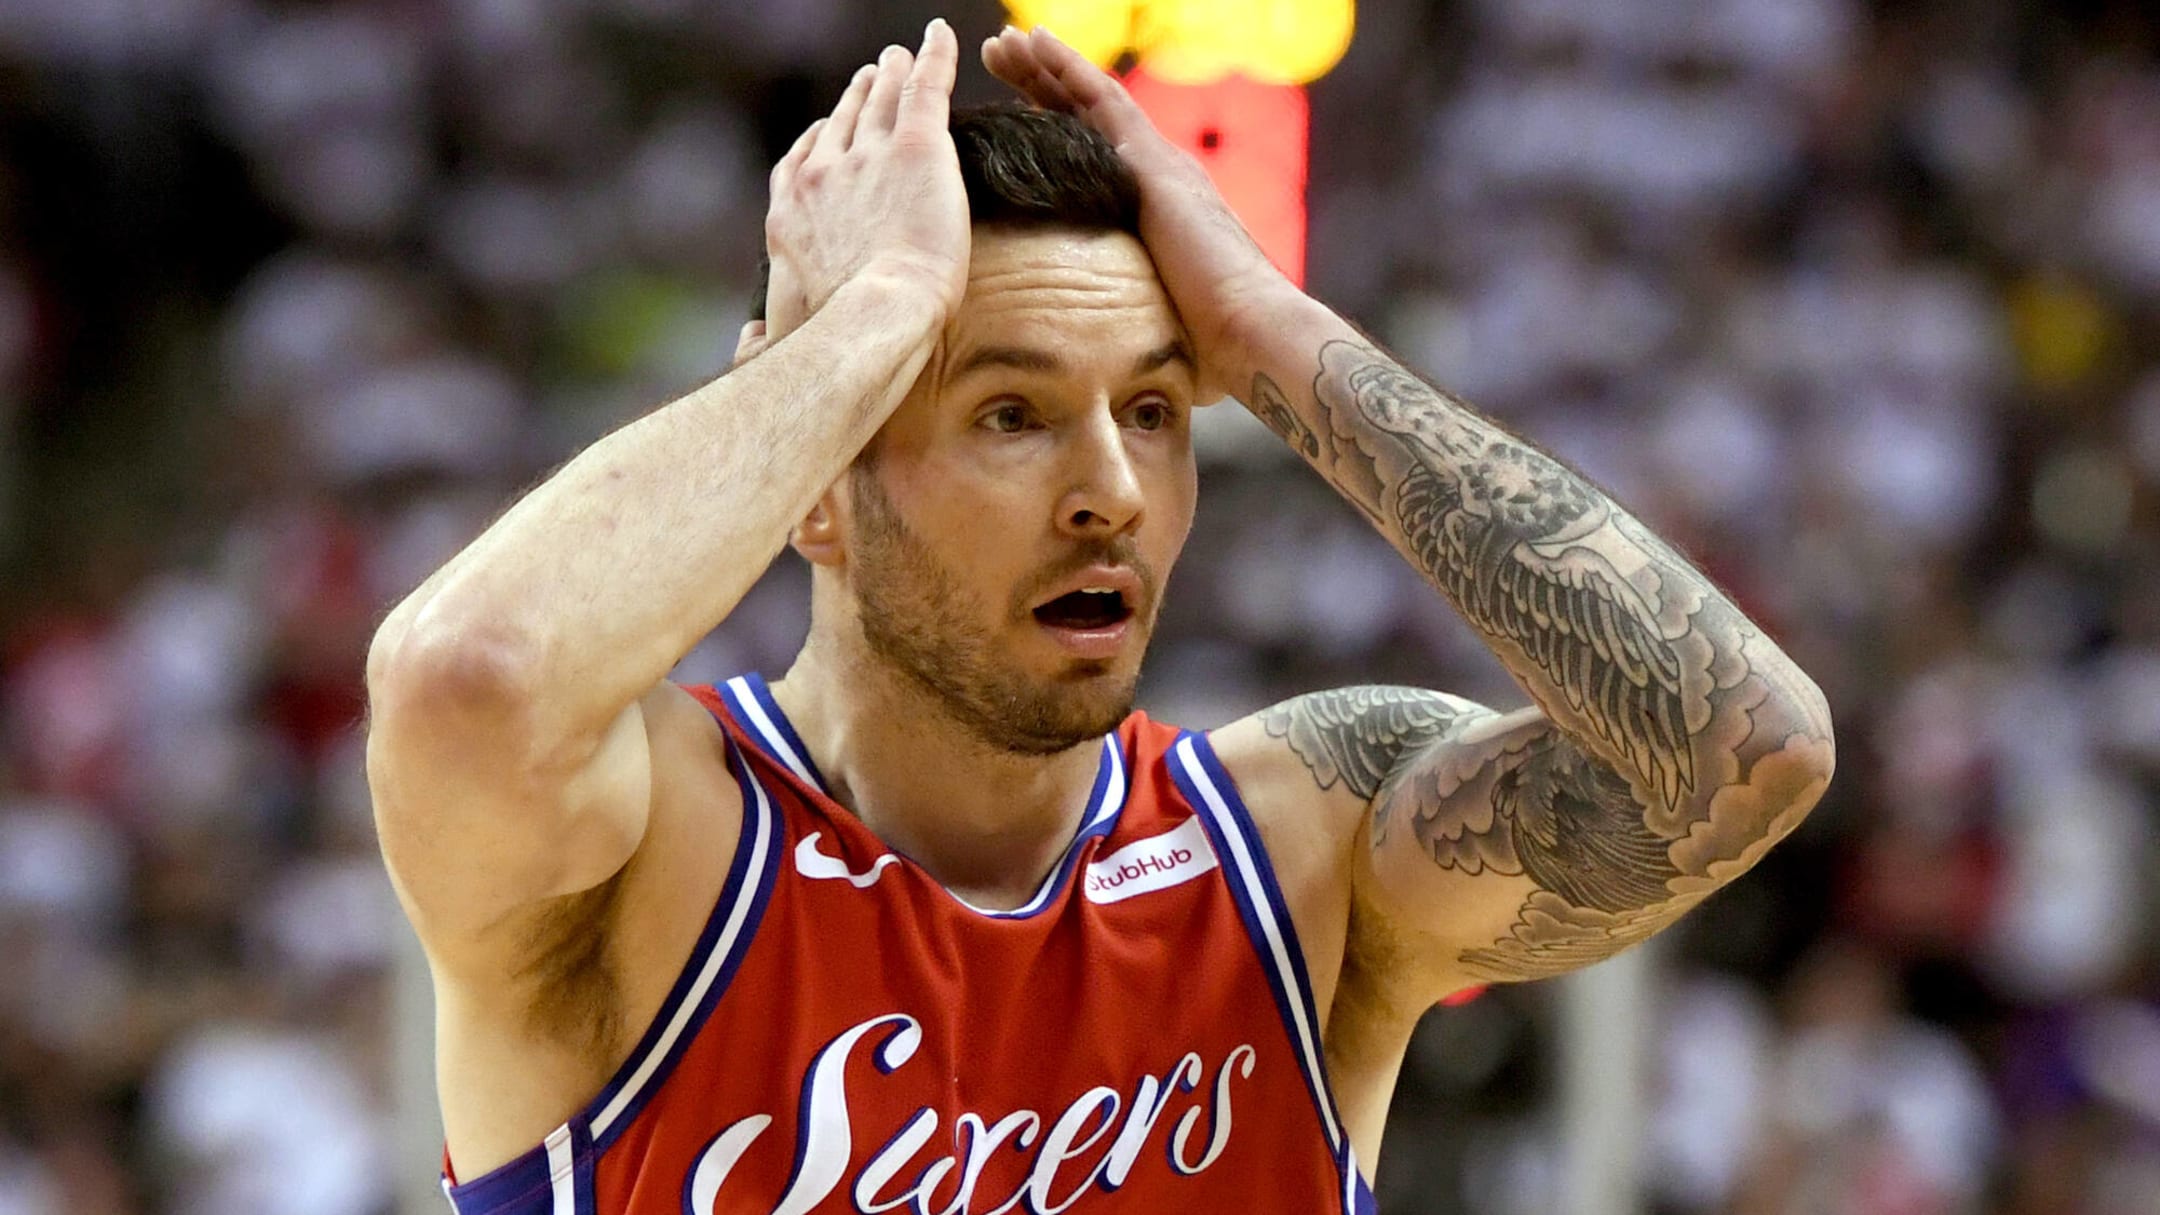 JJ Redick was harassed so much he almost quit basketball